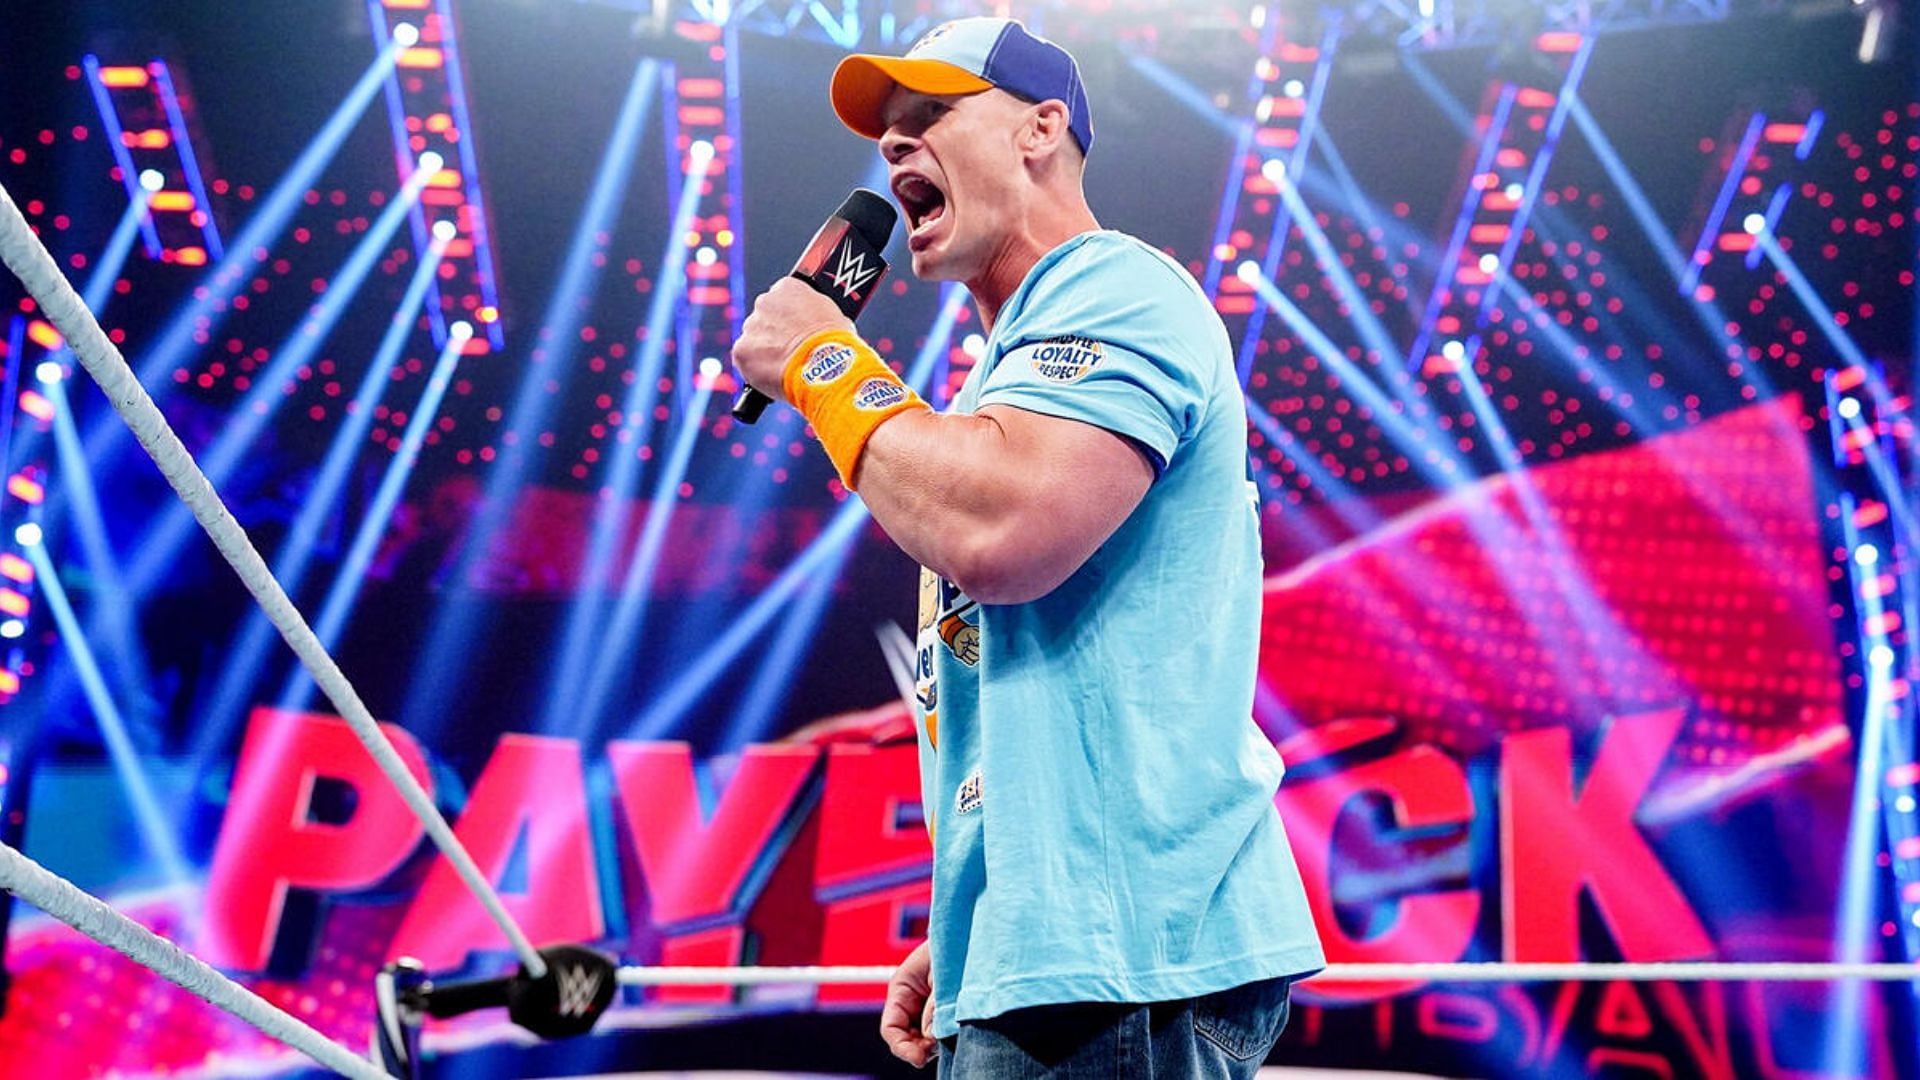 The Cenation Leader is 47 years old today! [Image credit: WWE.com]